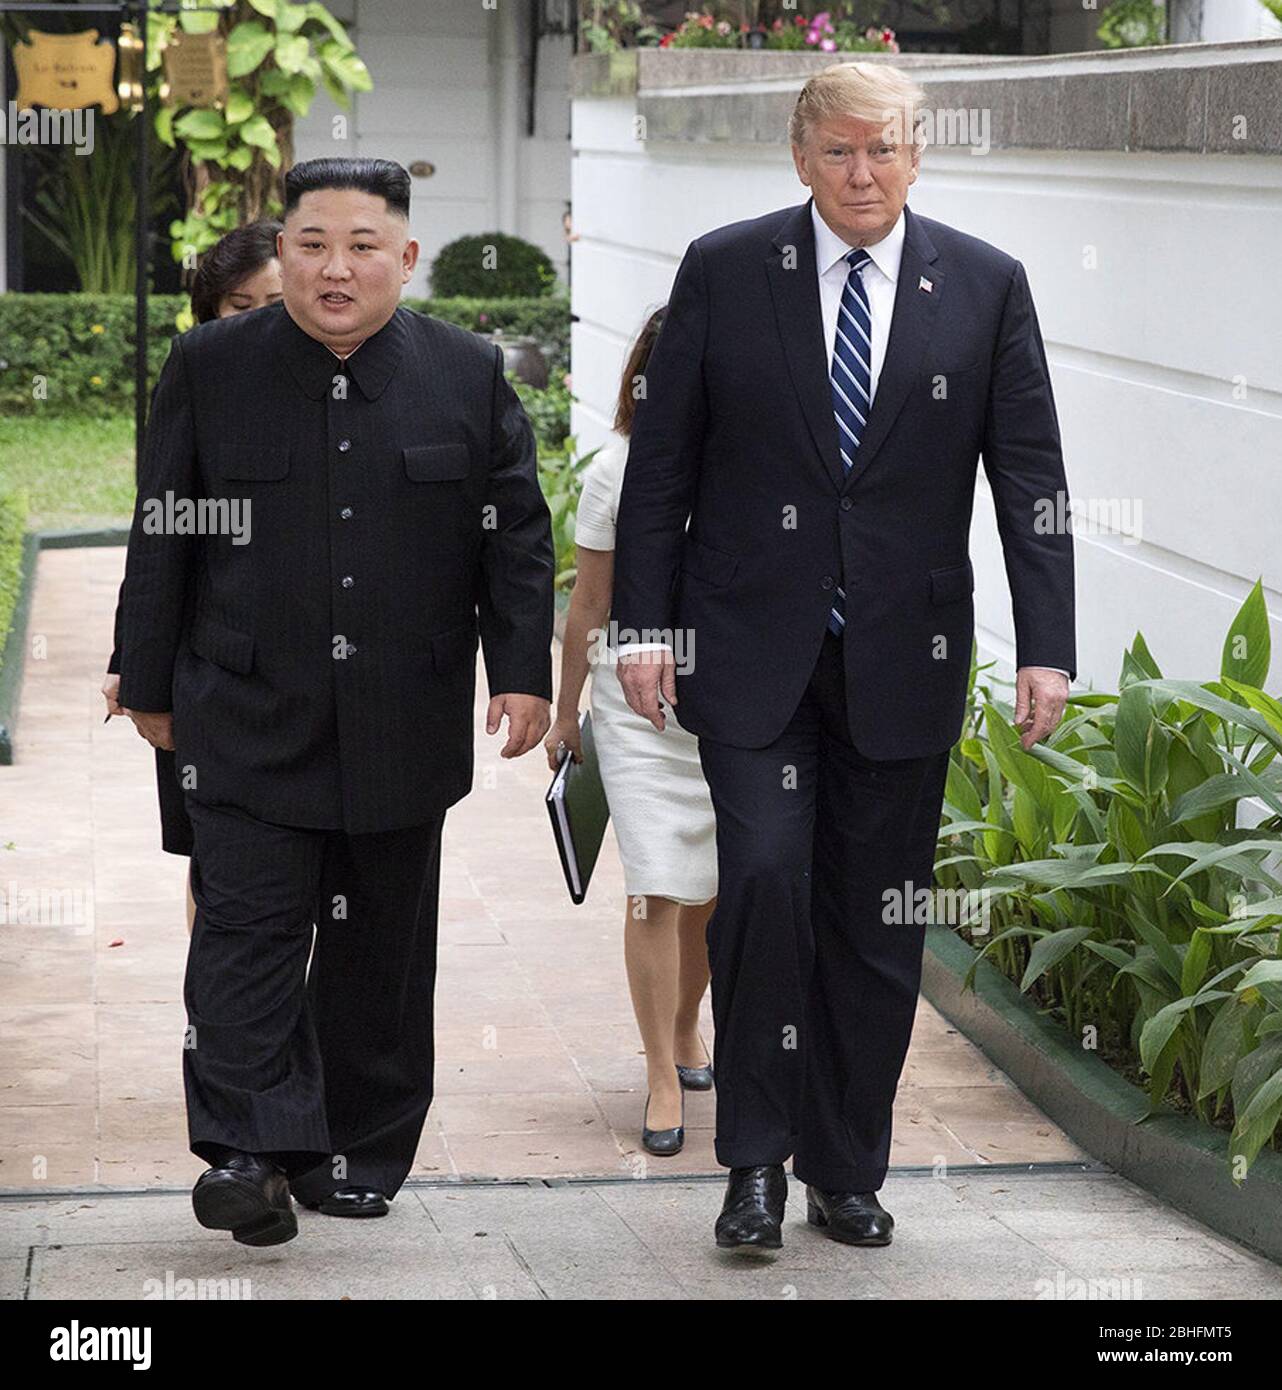 Hanoi, Vietnam. 27th Feb, 2019. President Donald J. Trump and Kim Jong Un, Chairman of the State Affairs Commission of the Democratic People's Republic of Korea, walk together on the pool patio Thursday, Feb. 28, 2019, at the Sofitel Legend Metropole hotel in Hanoi, prior to participating in an expanded bilateral meeting. People: President Donald Trump, Kim Jong Un Credit: Storms Media Group/Alamy Live News Stock Photo